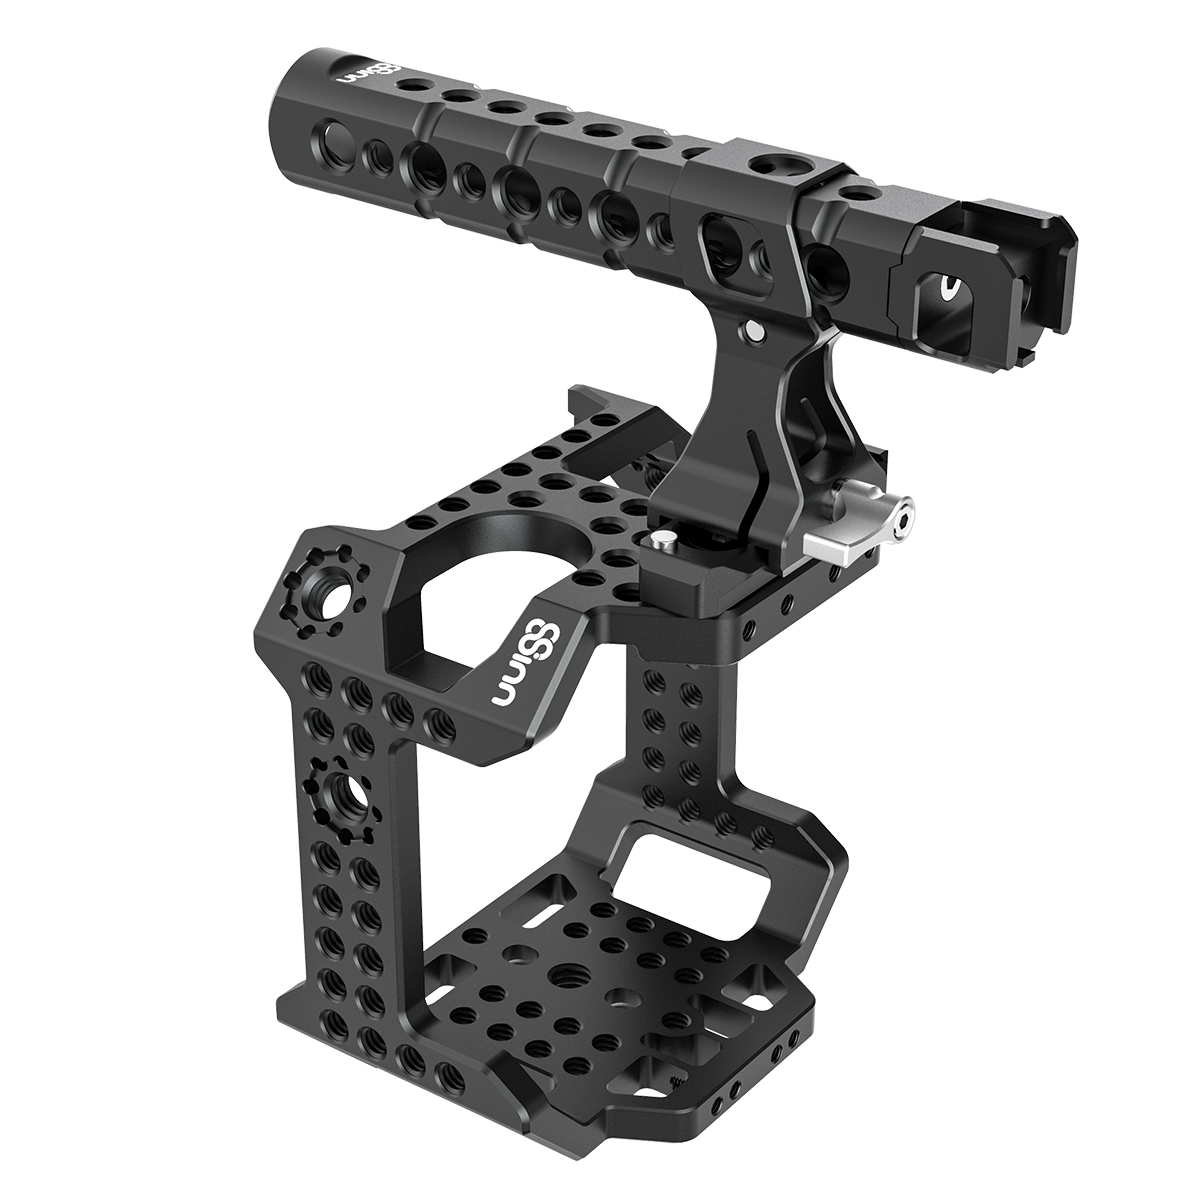 8Sinn Z CAM E2 Cage + Top Handle Pro | Shoulder Supports (Rig) and